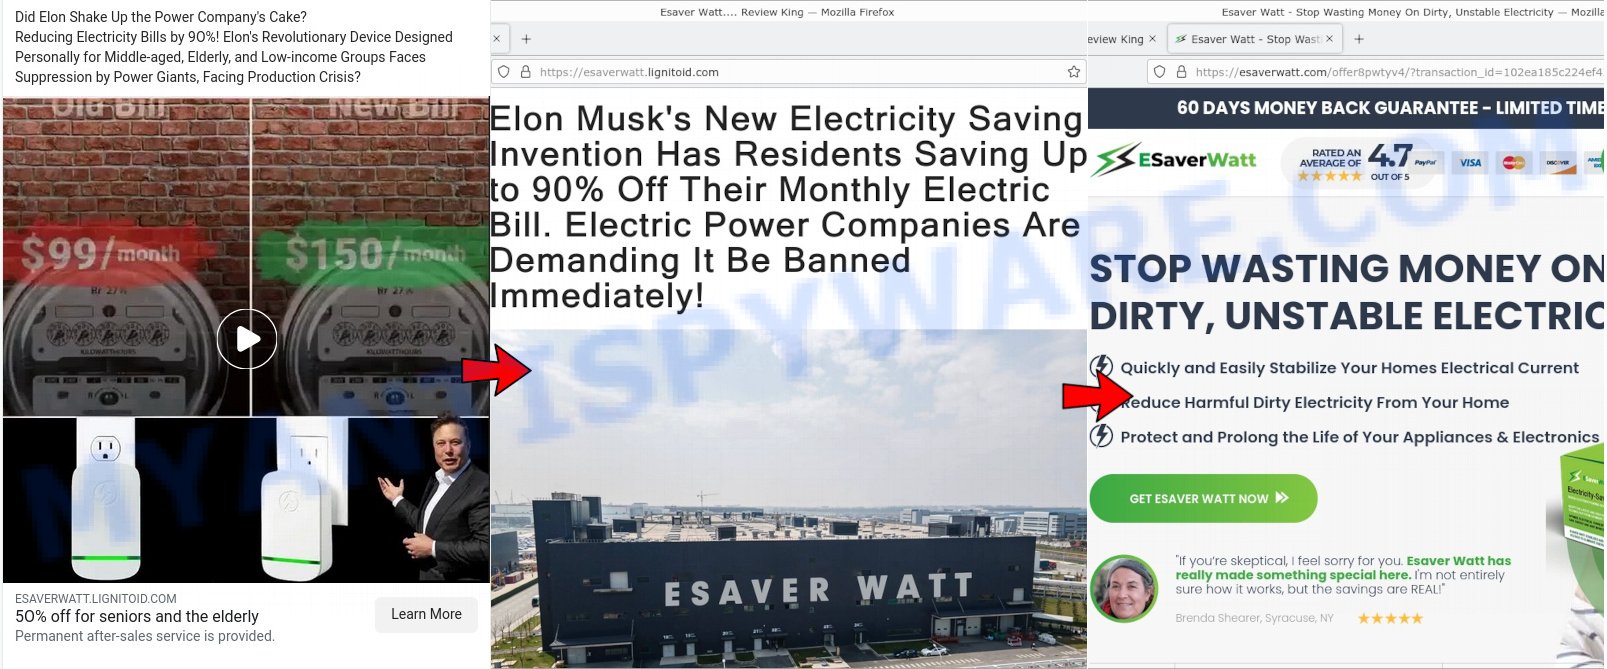 Watt Review: The Truth Behind the Scam and the Deceptive Elon Musk Ads